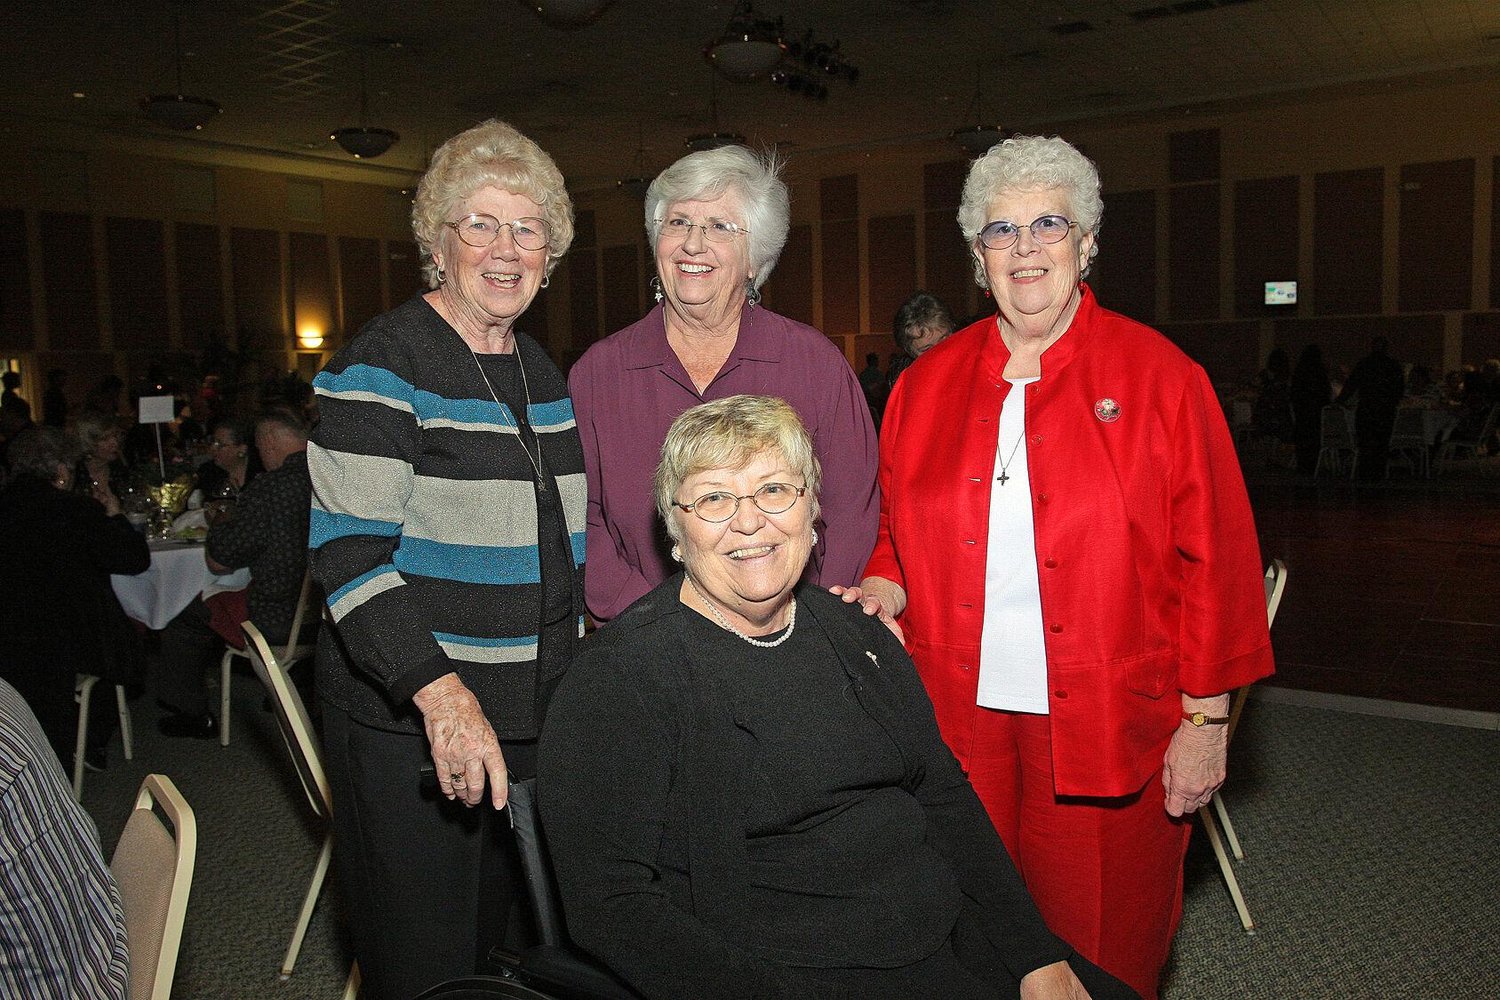 Sisters of Notre Dame de Namur pose for a photo during a farmworkers fundraiser in Maitland. Front center is Sister Cathy Gorman. In the back row, left to right, are Sisters Teresa McElwee, Ann Kendrick and Gail Grimes. (CHARLES HODGES | FC)